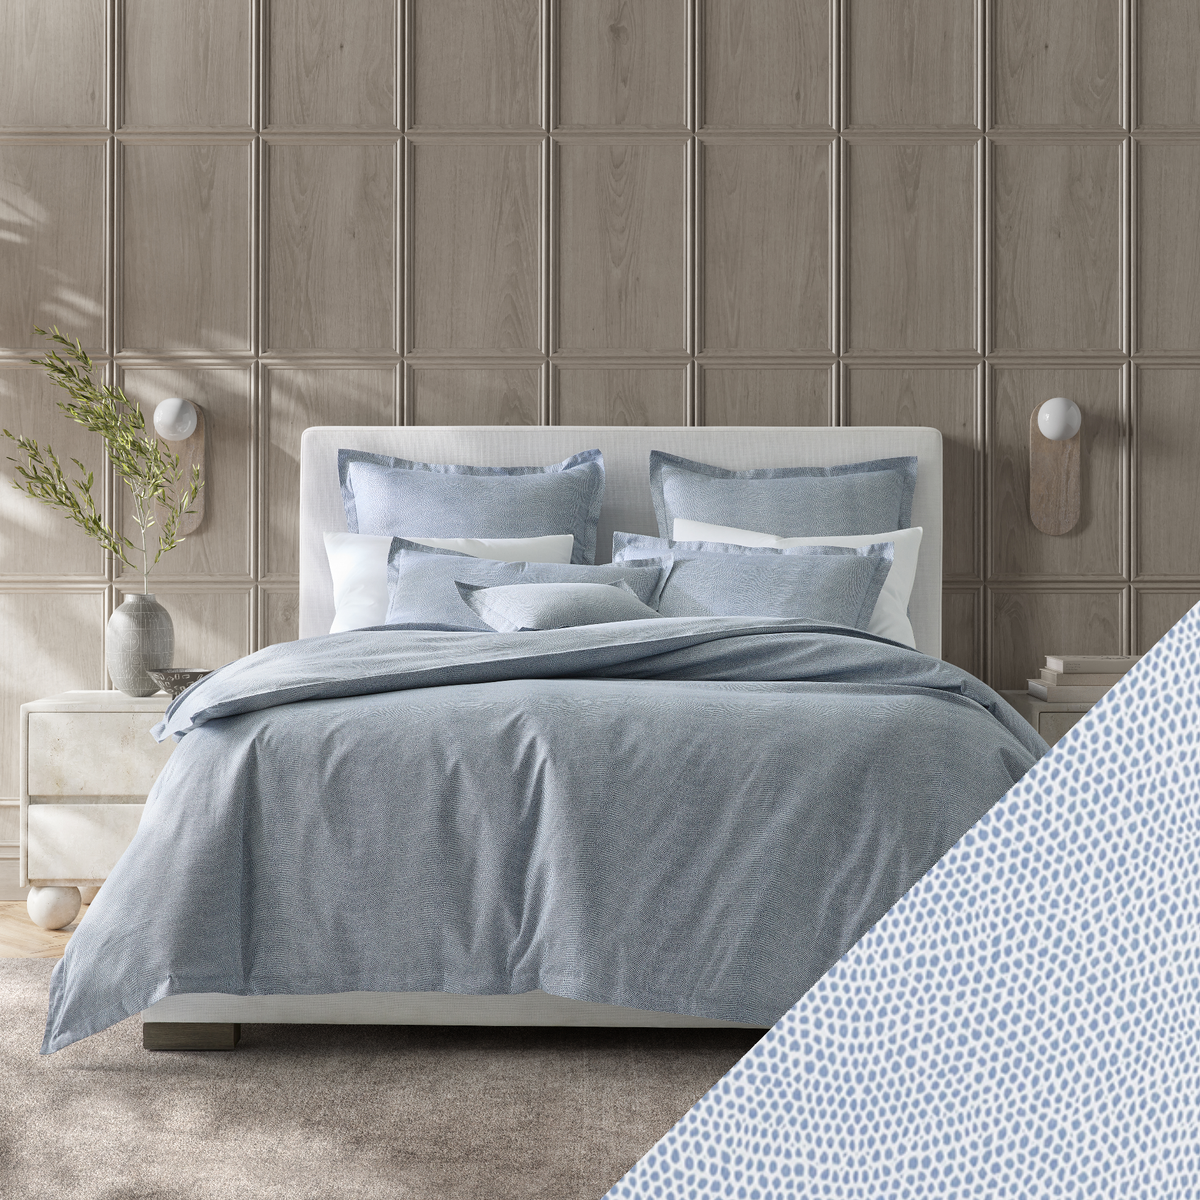 Full Bed Dressed in Steel Blue Matouk Jasper Bedding with Hazy Blue Swatch